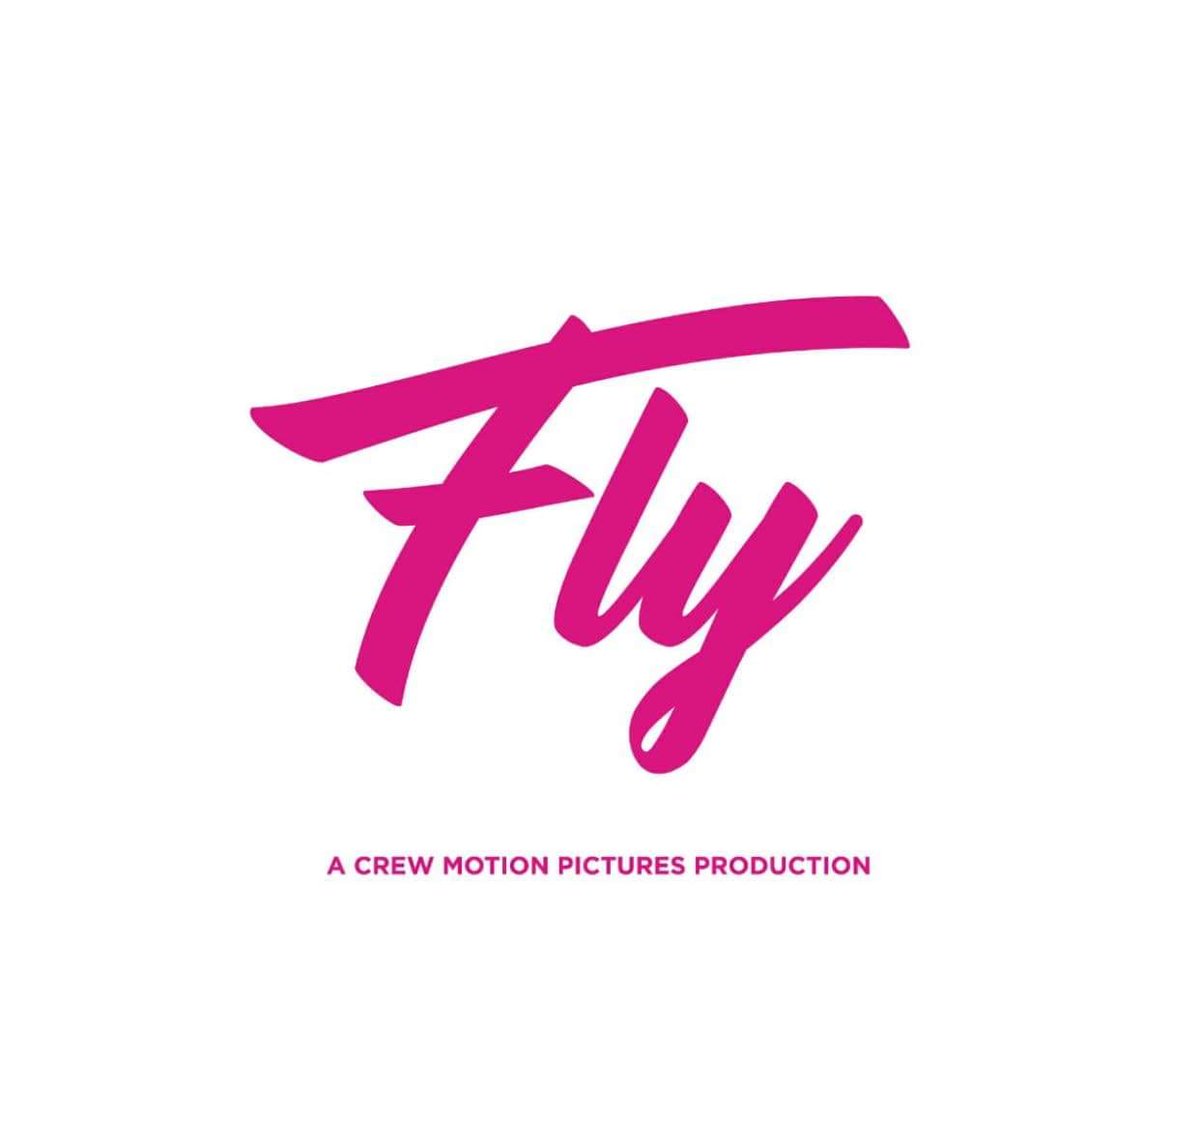 Crew Motion Pictures is thrilled to officially announce our forthcoming feature film  “FLY”. The movie is dedicated to all the females and breast cancer warriors.
#October #BreastCancer #Featurefilm #Fly #CrewMotionPictures  #TheCrewFilms #mkalicrew #nadeemnawaz #asmanabeel